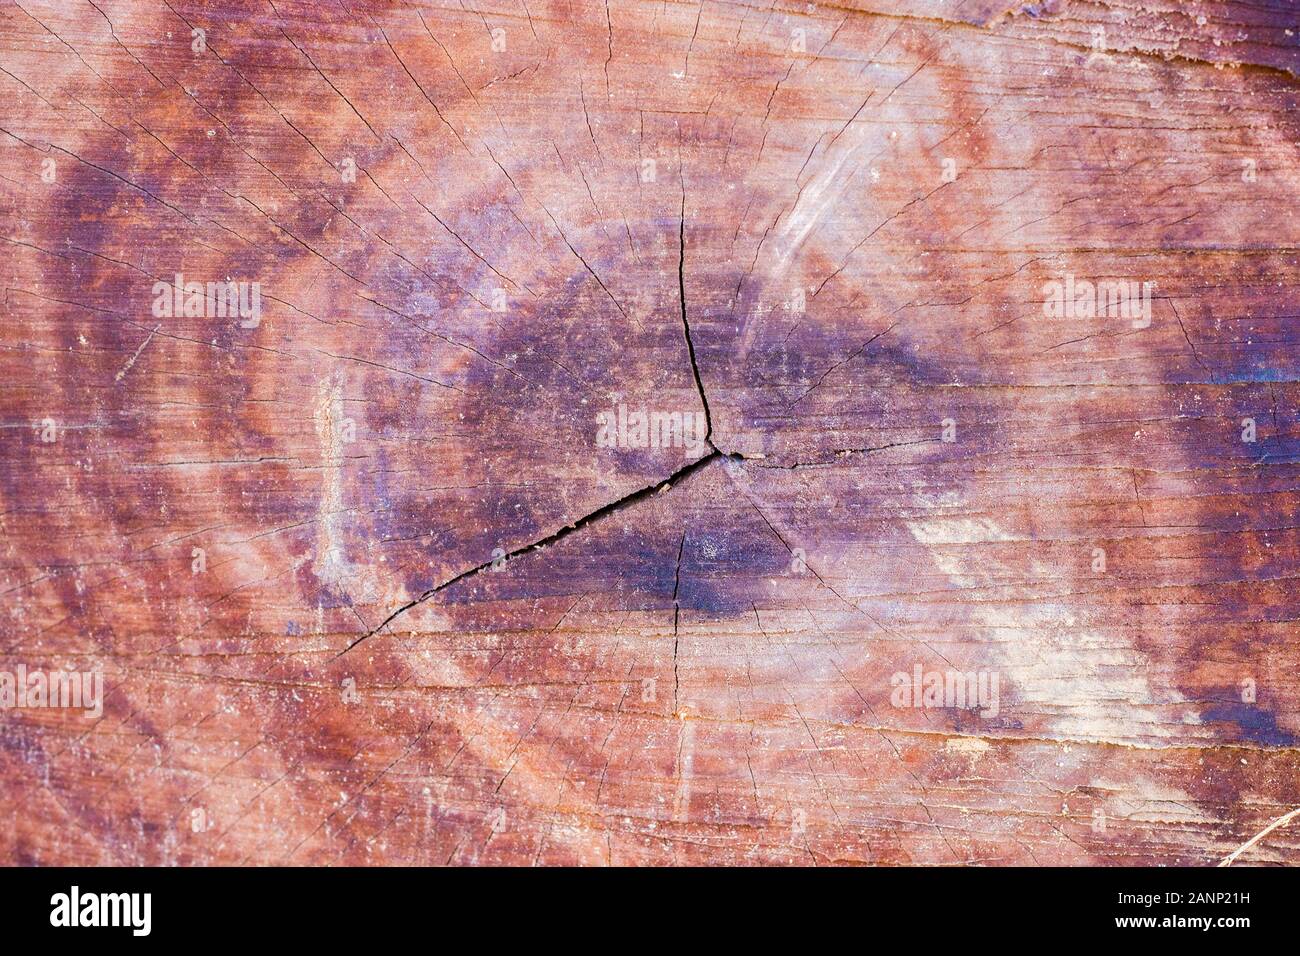 selective focus of a round cut wood for texture and background Stock Photo